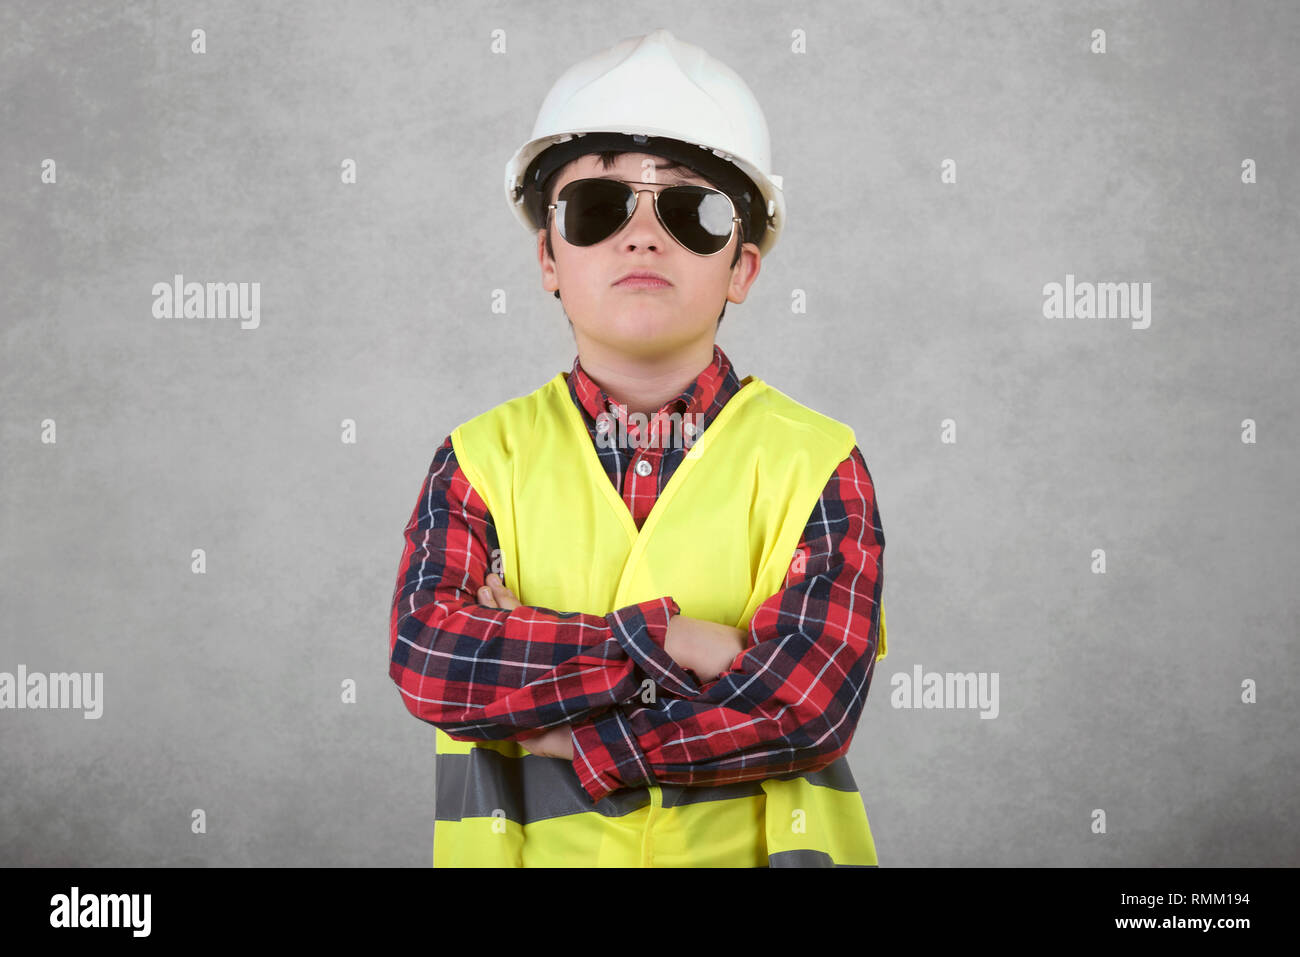 little child construction worker in White helmet and sunglasses against gray background Stock Photo